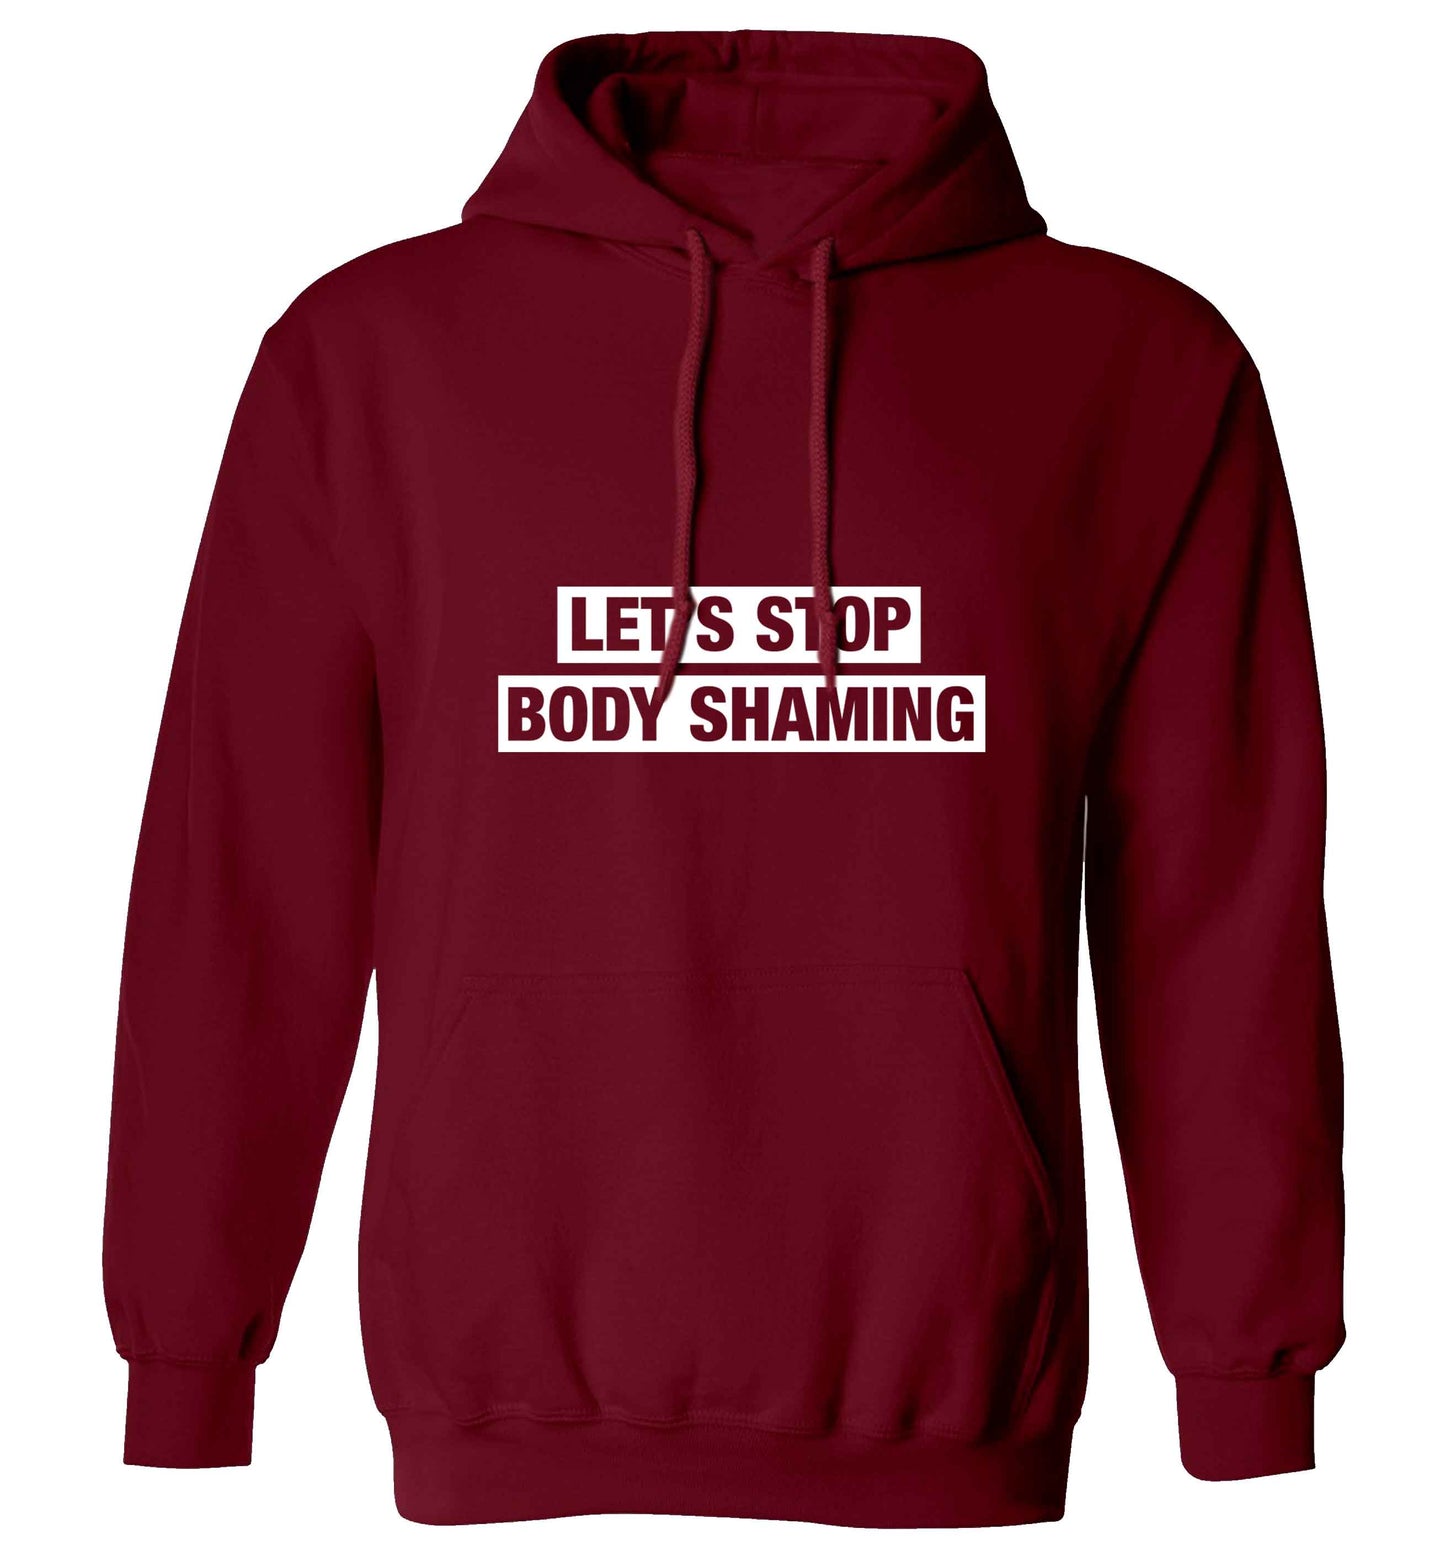 Let's stop body shaming adults unisex maroon hoodie 2XL